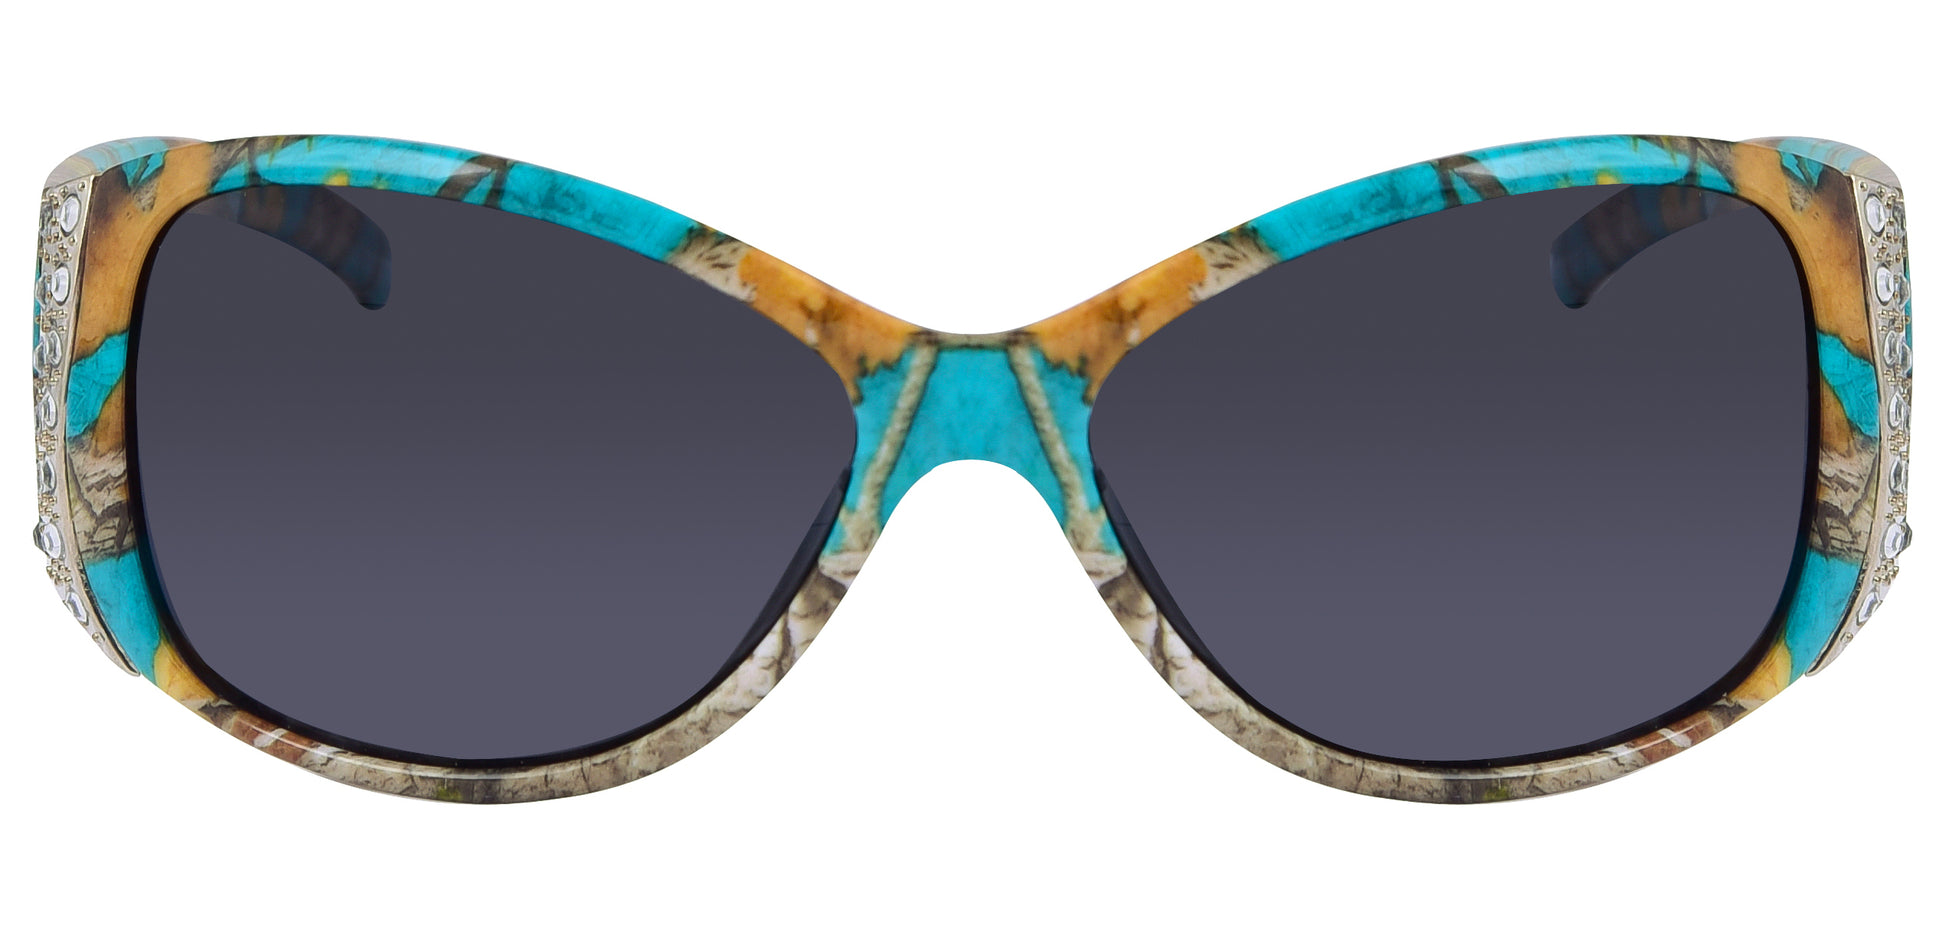 Third image: Hornz Teal Camouflage Polarized Sunglasses Country Girl Style Camo & Free Matching Microfiber Pouch – Teal Camo Frame - Smoke Lens